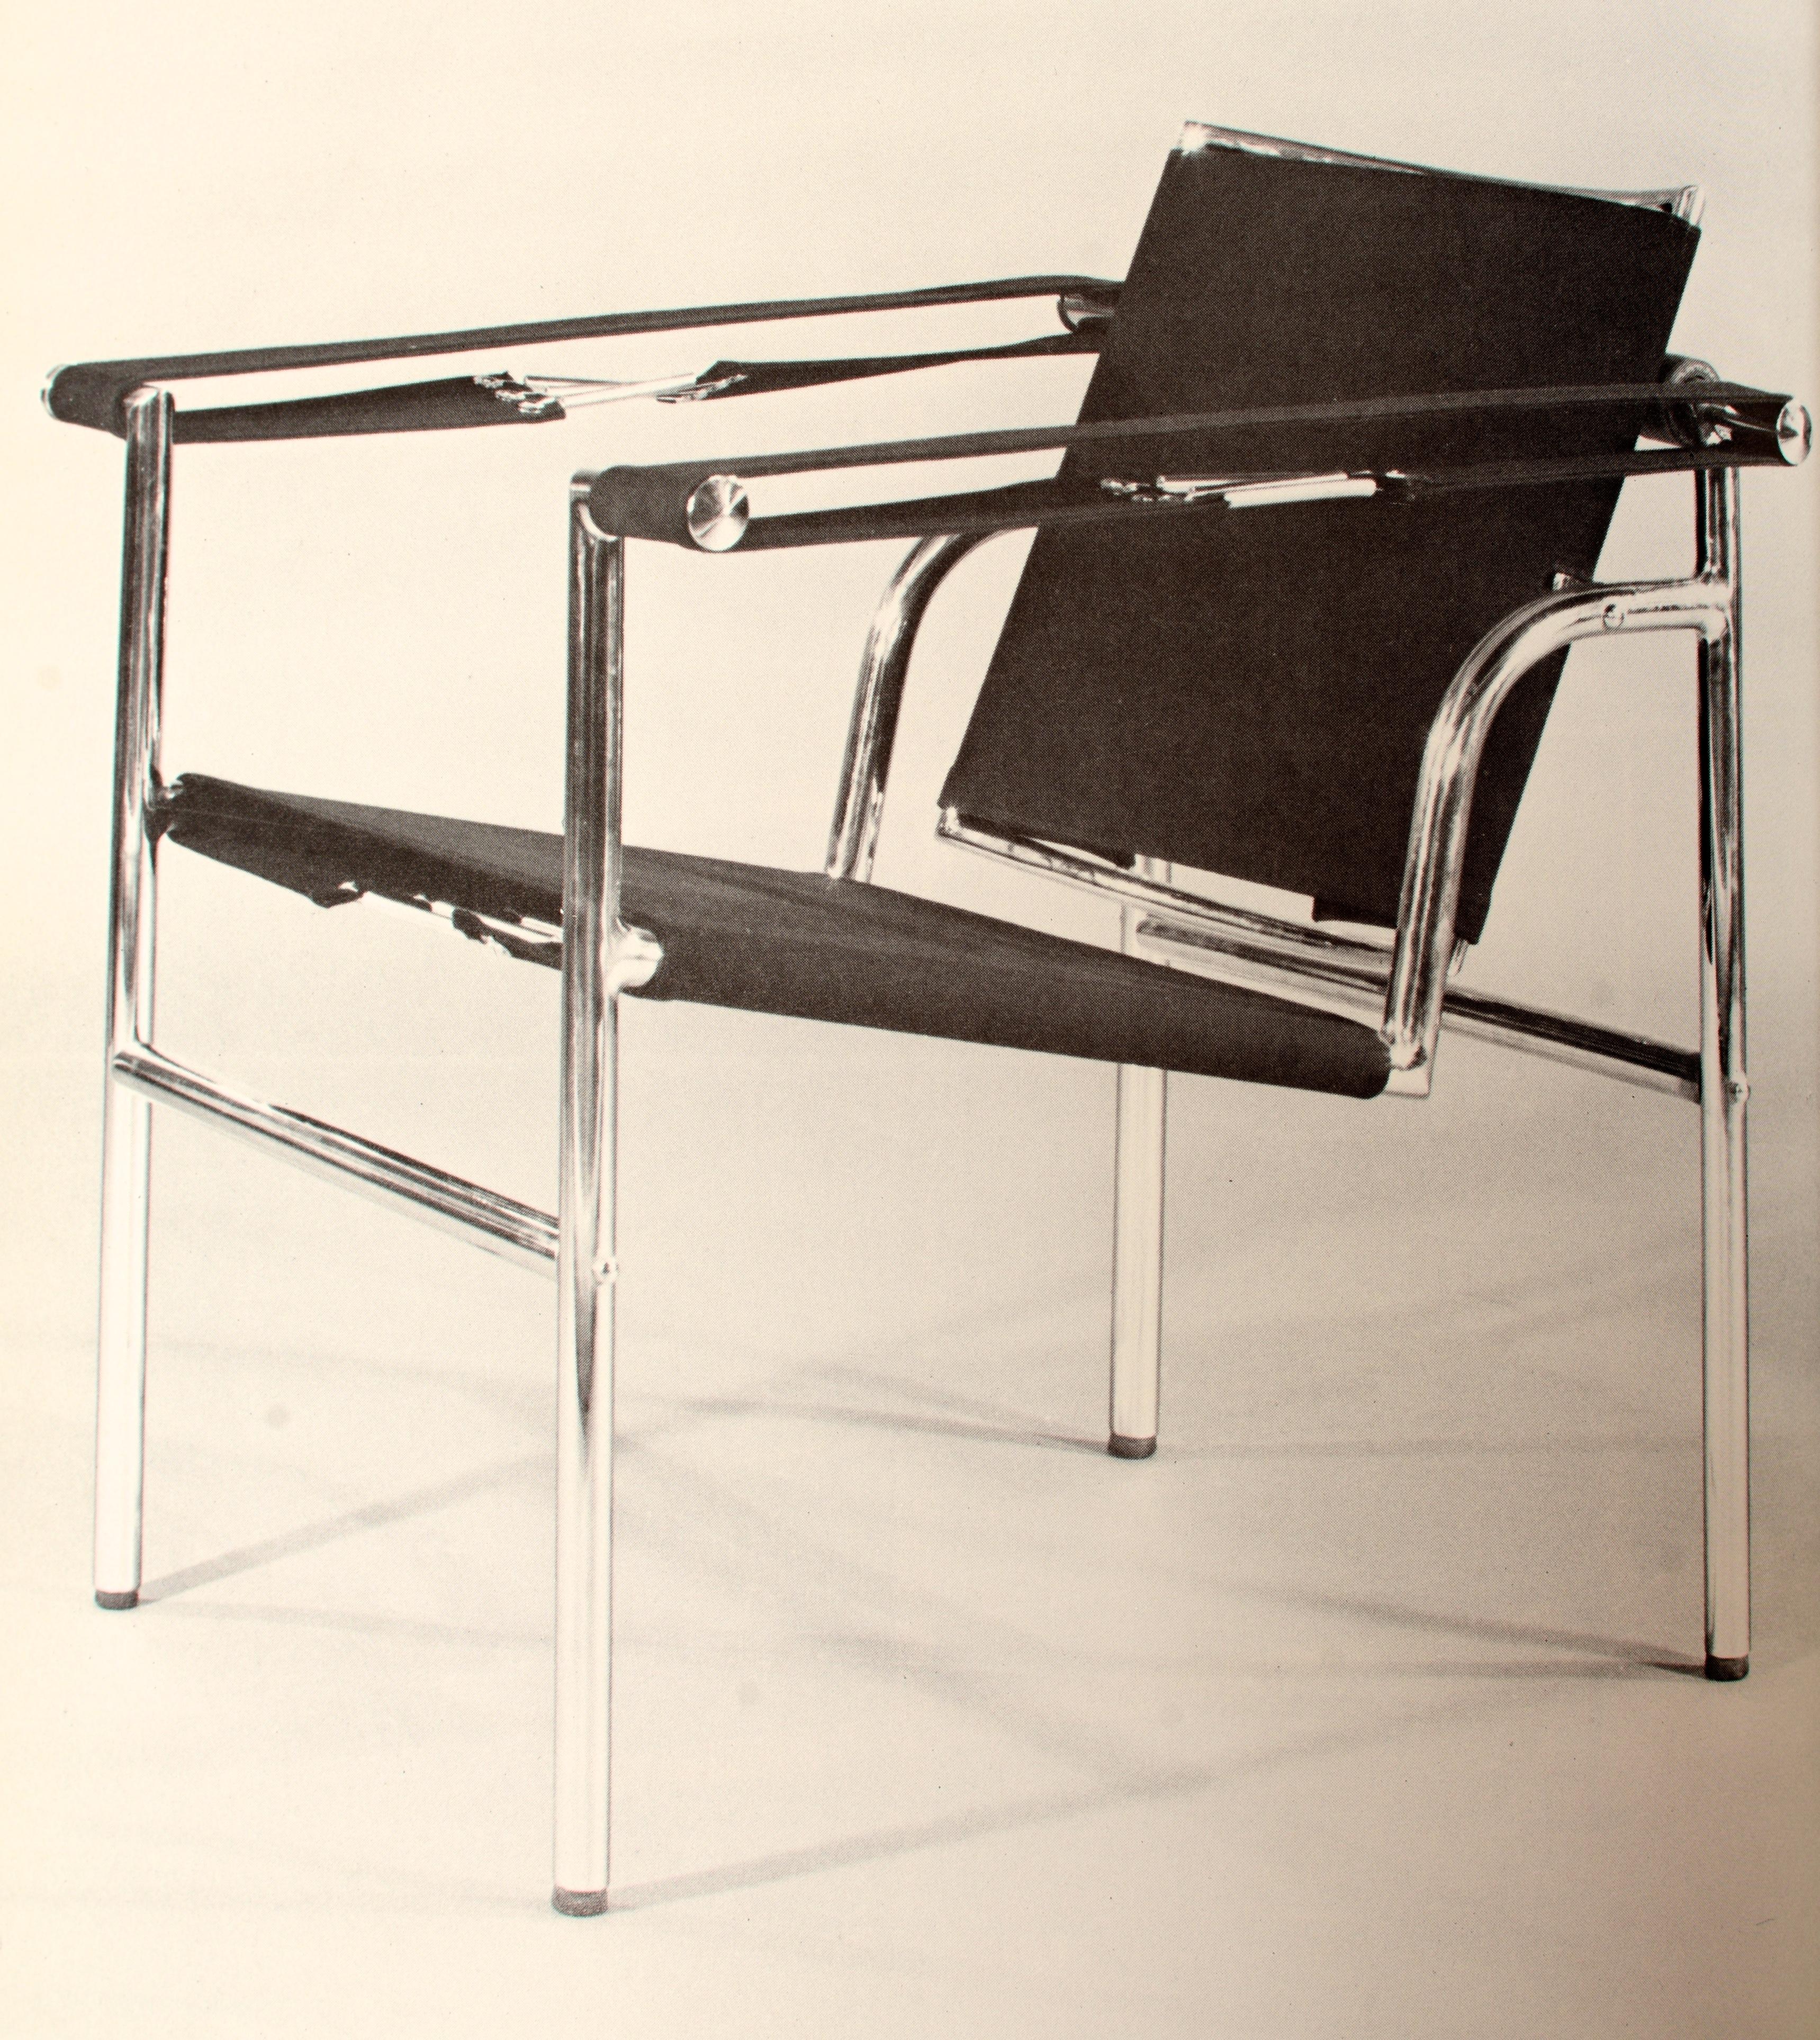 Late 20th Century Furniture Designed by Architects by Marian Page, First Printing Paperback For Sale